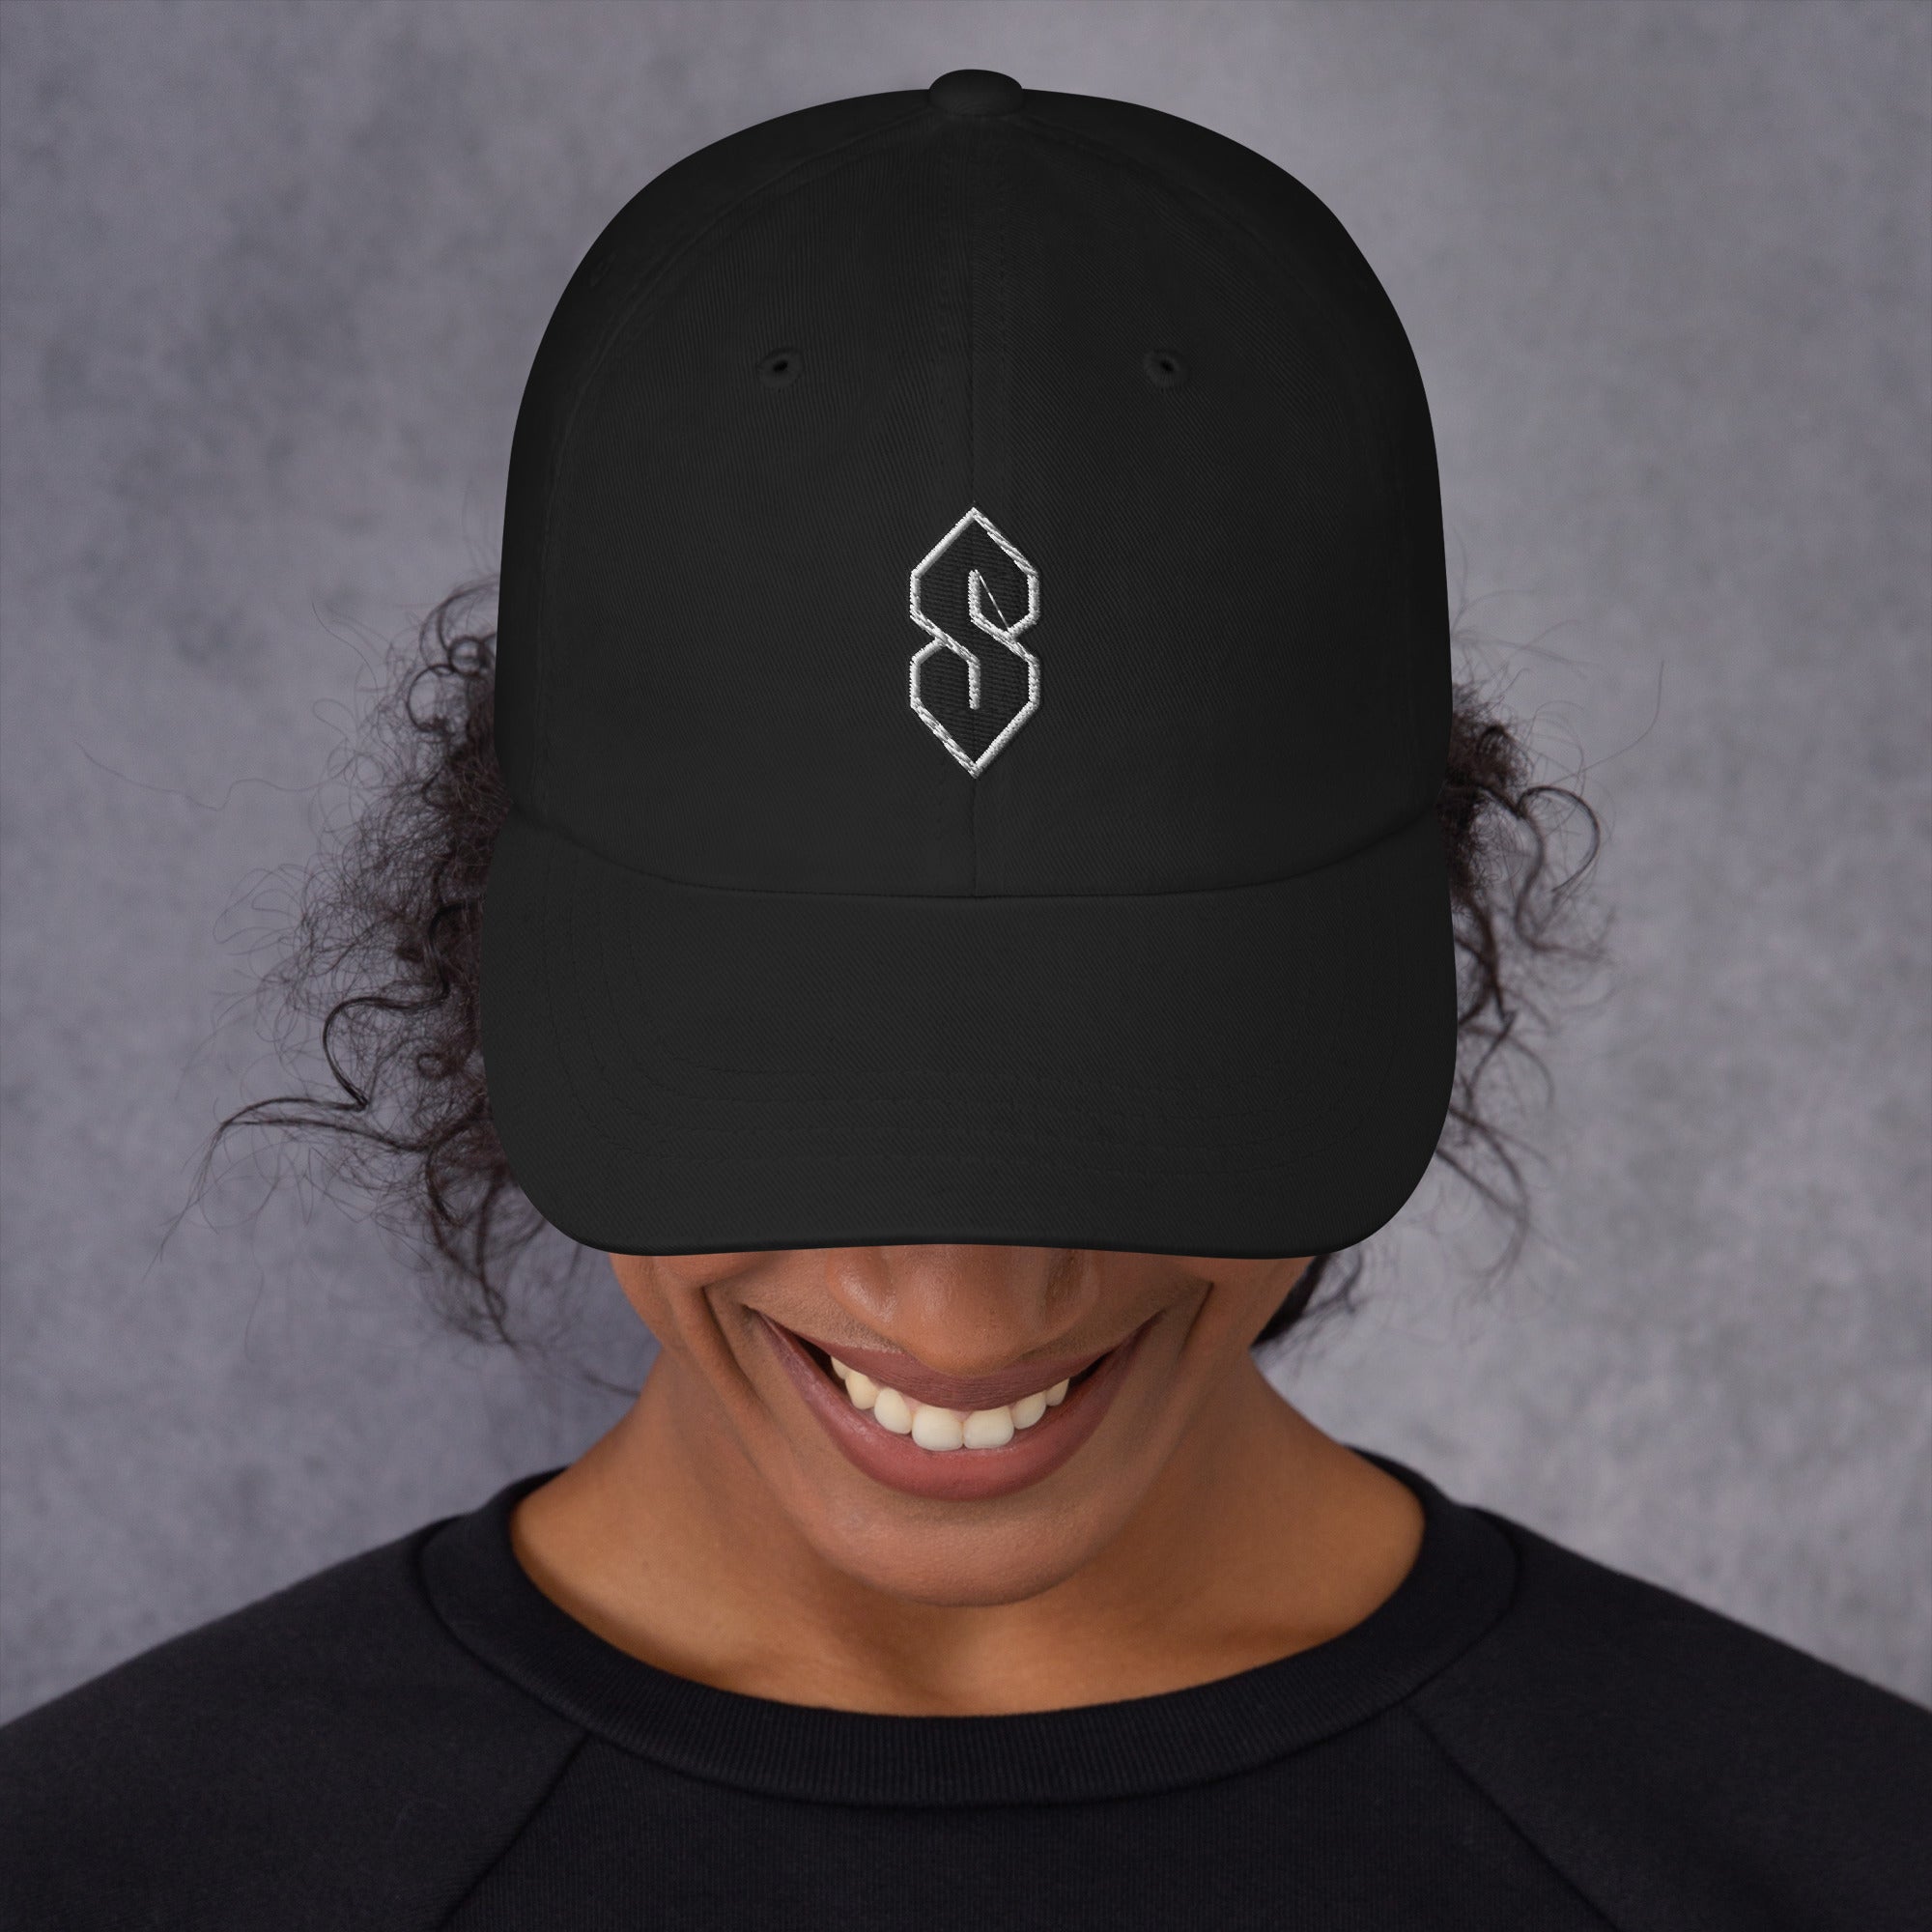 Cool S, Graffiti S, Middle School S Embroidered Baseball Cap Dad hat Black Thread - Edge of Life Designs